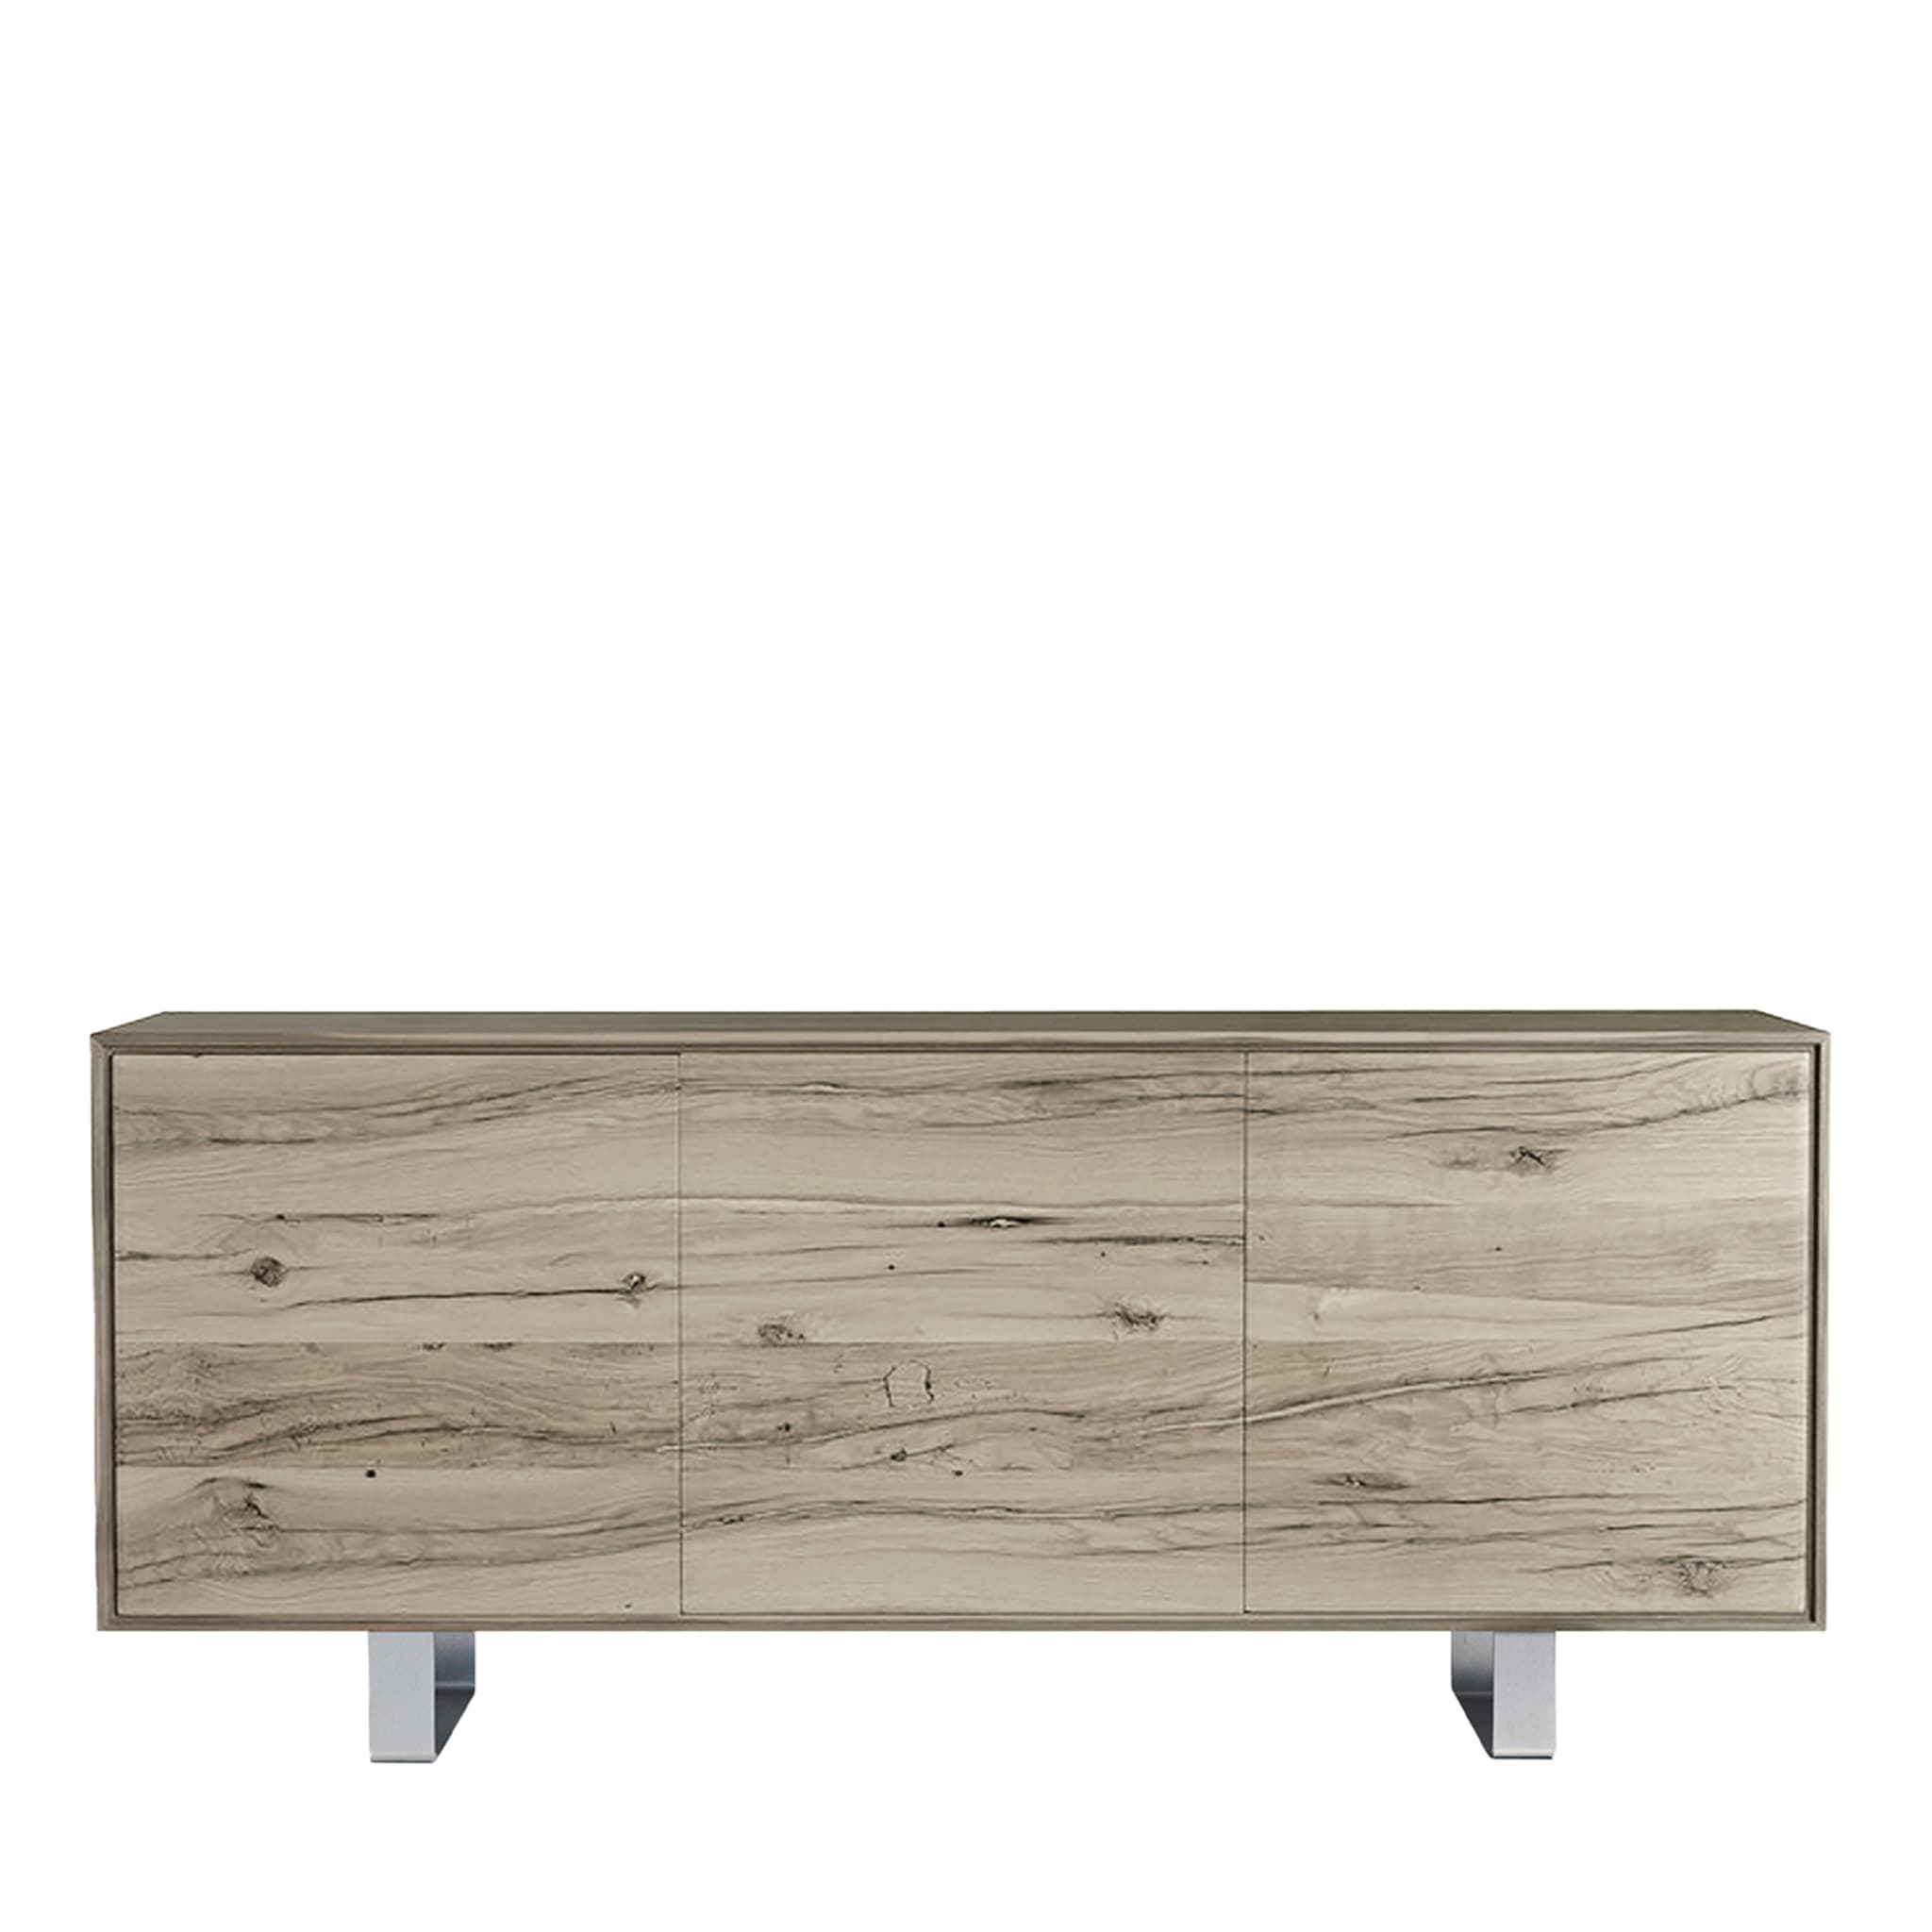 Materia Rovere Sideboard #1 - Main view